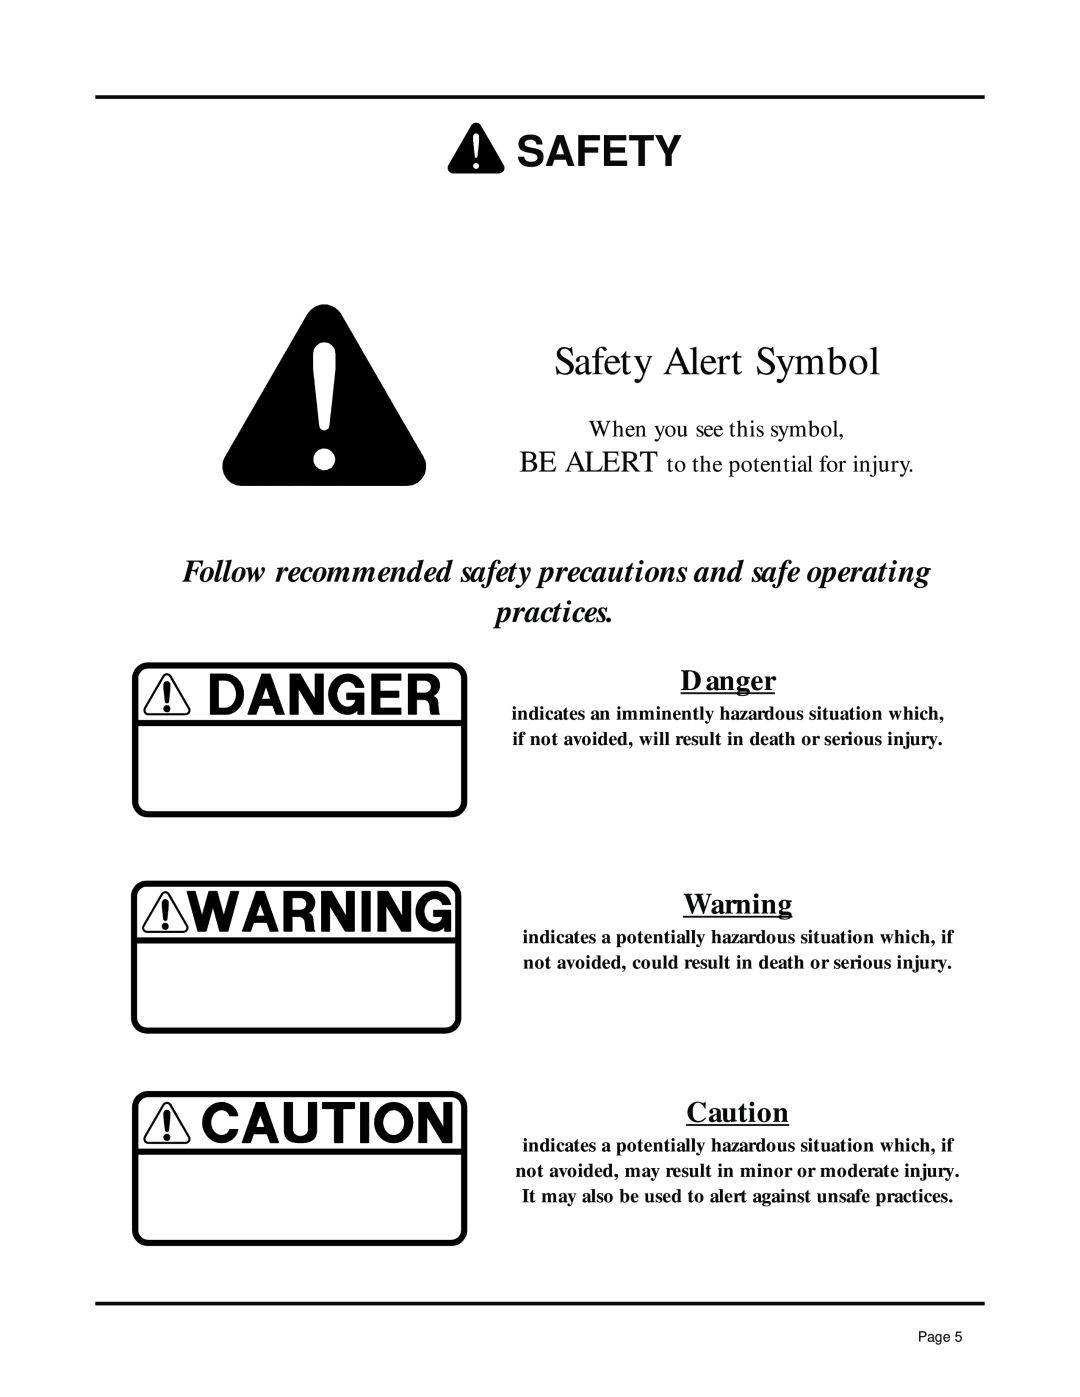 Dixon 13091-0500 manual Danger, Safety Alert Symbol, Follow recommended safety precautions and safe operating practices 